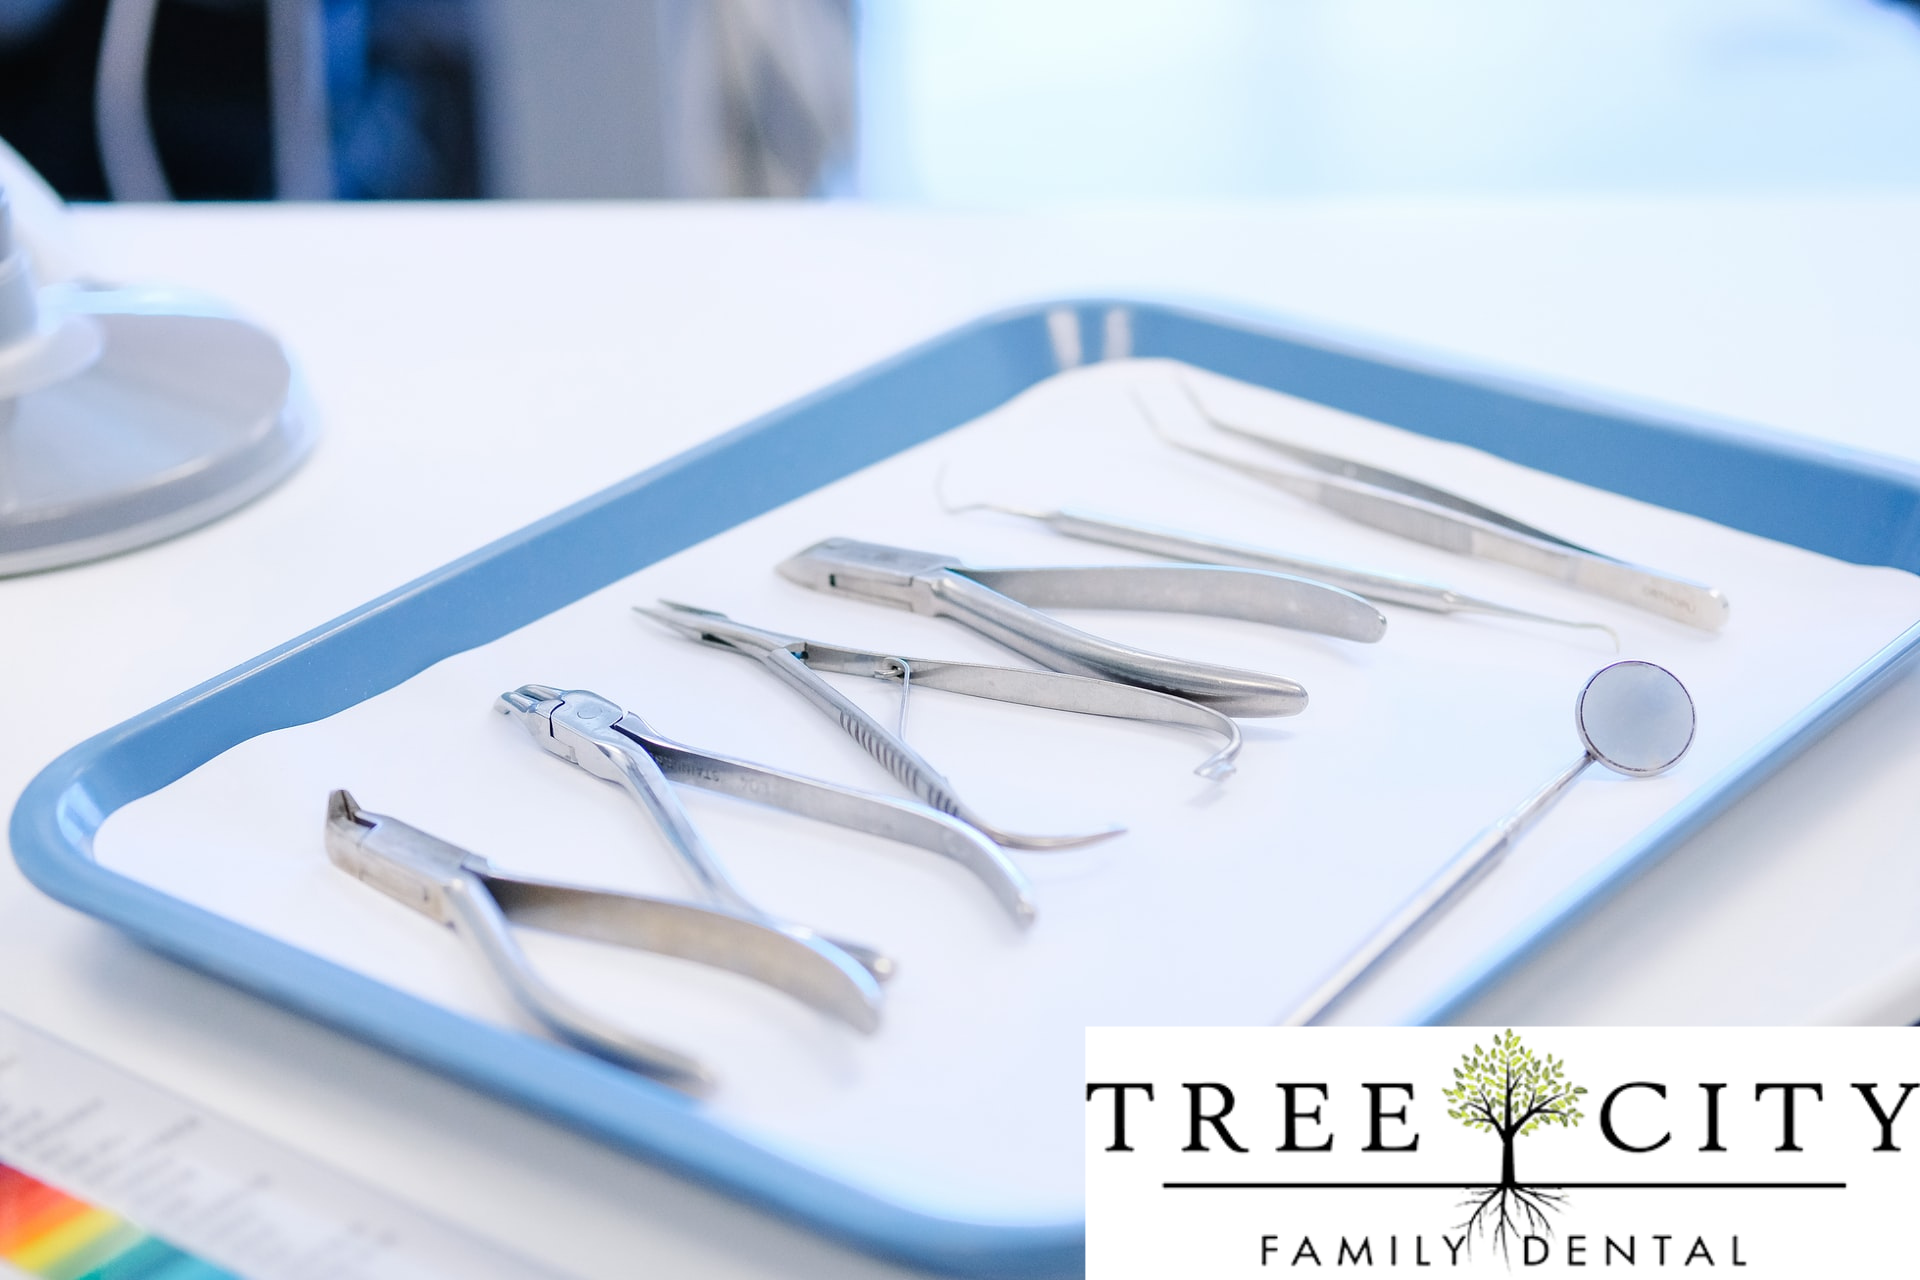 How to Prepare for an Upcoming Tooth Extraction